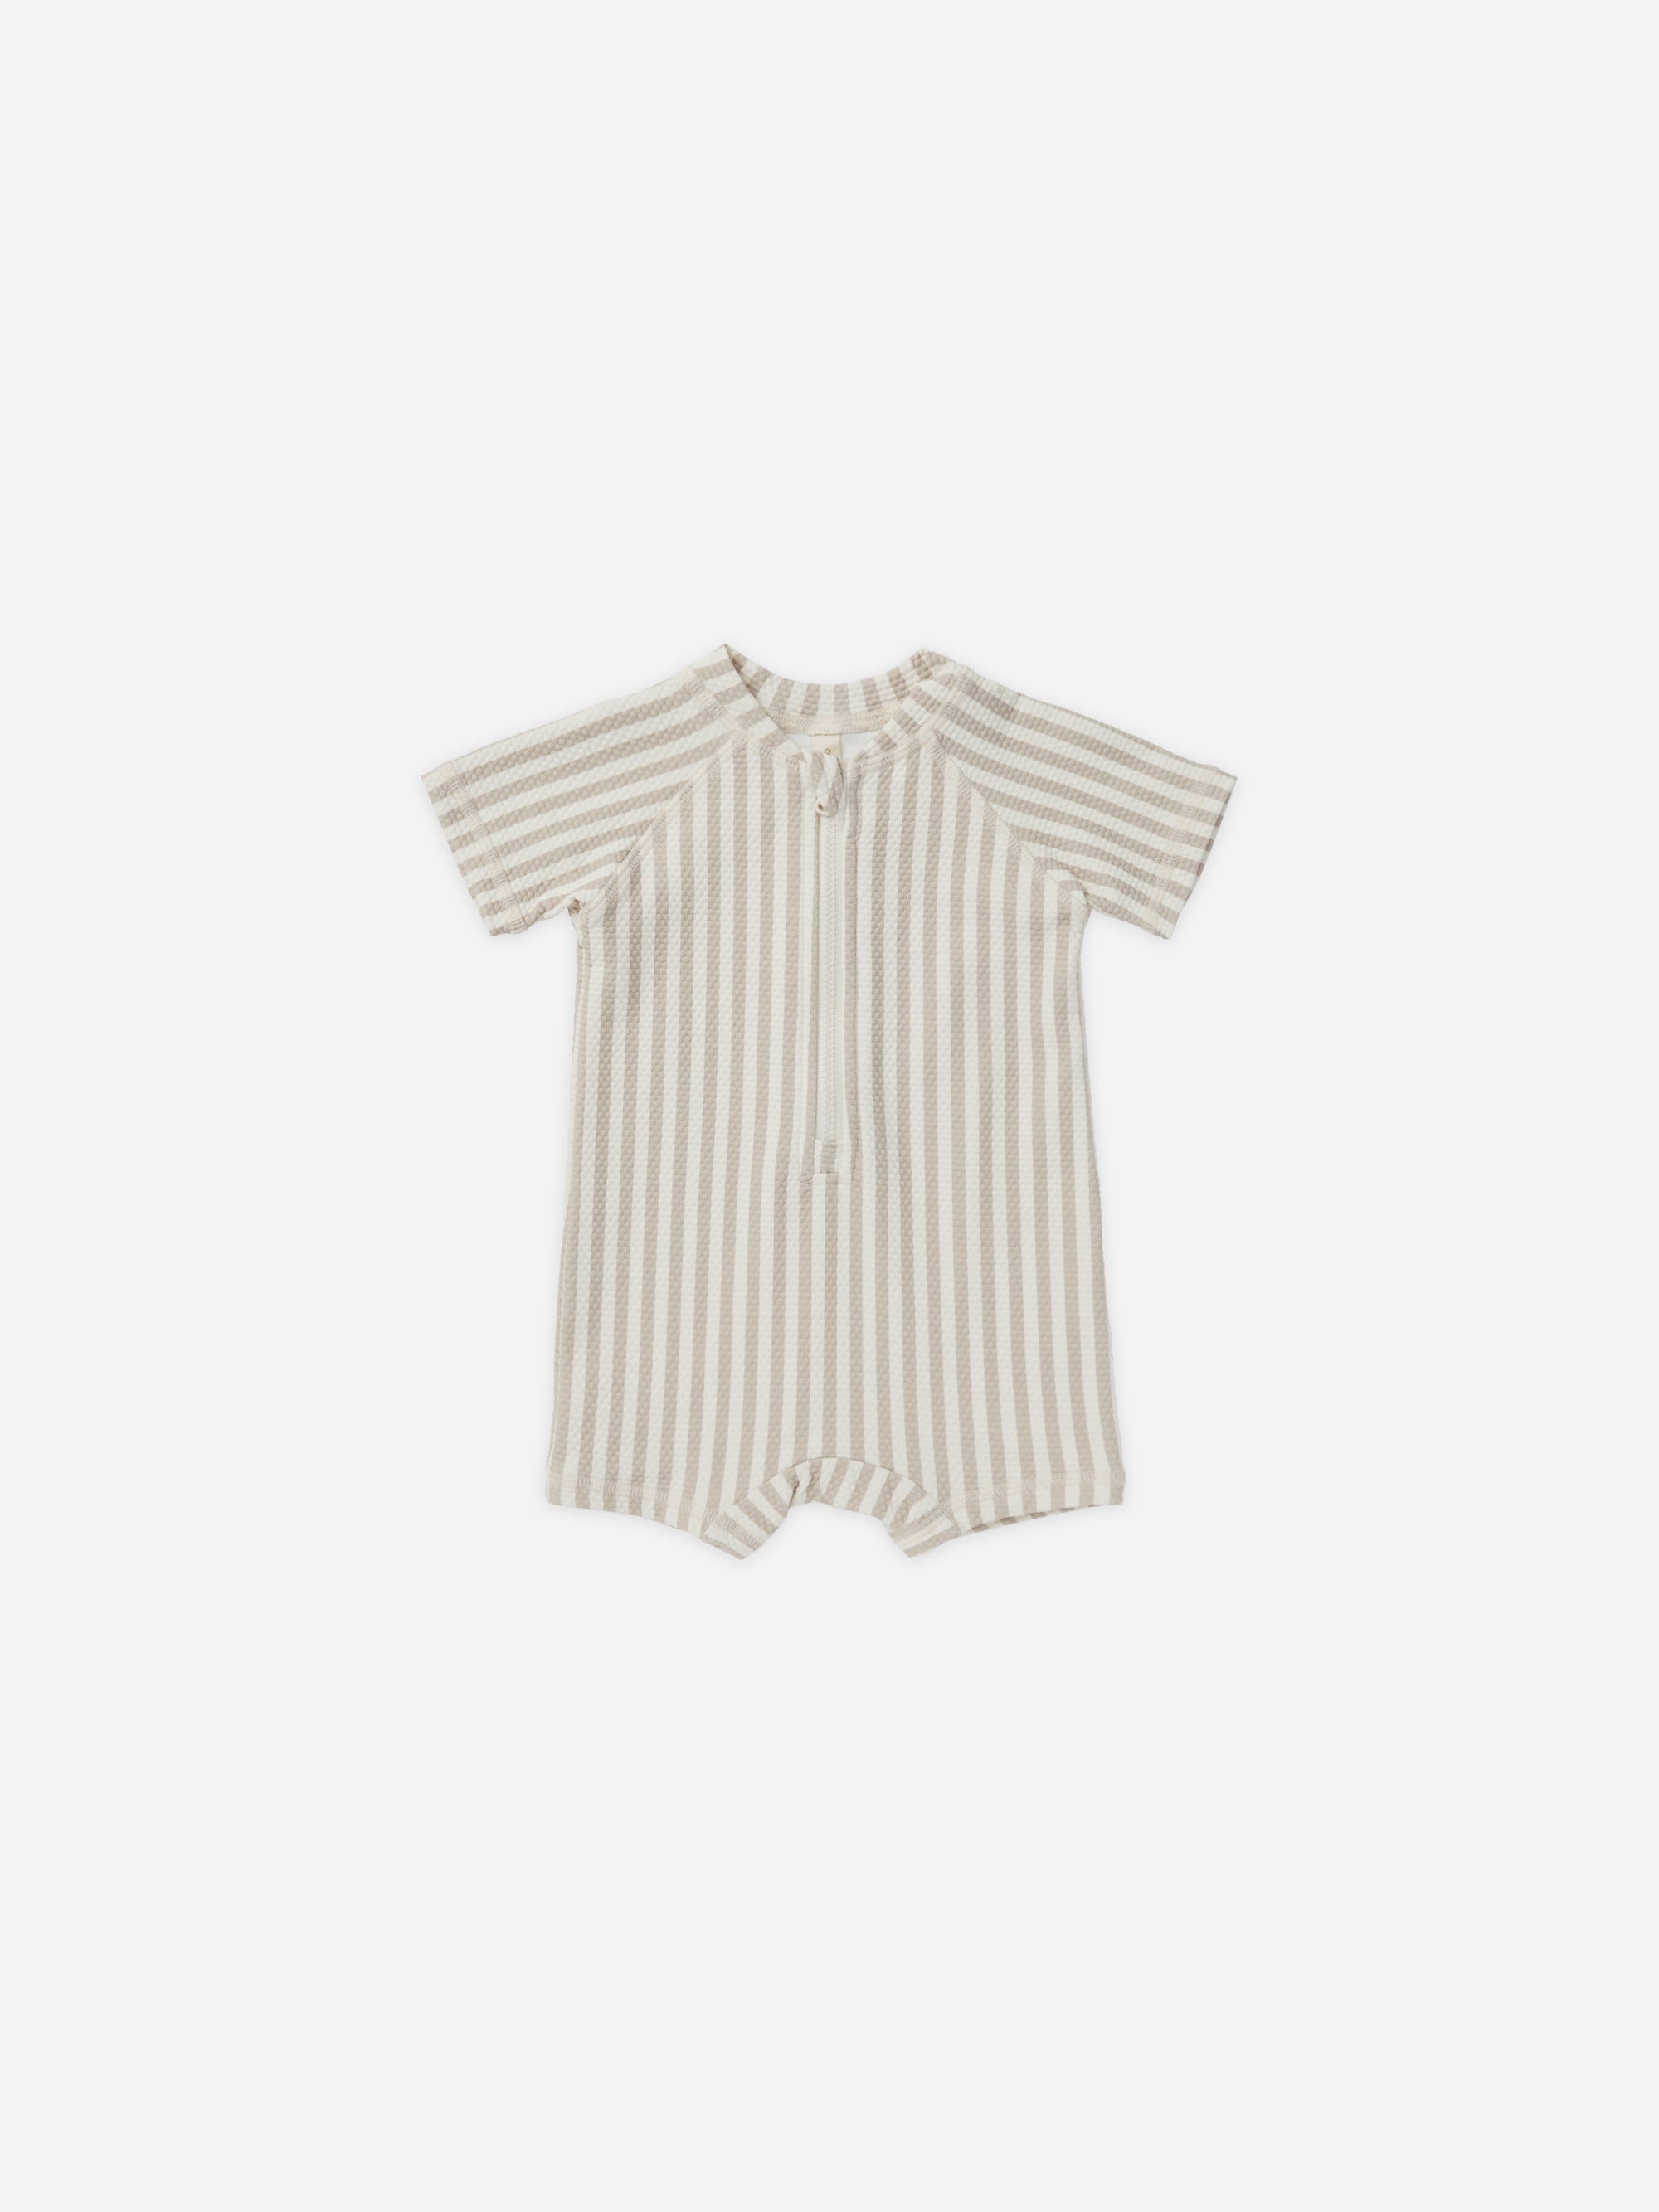 Zip Rashguard One-Piece || Ash Stripe - Rylee + Cru | Kids Clothes | Trendy Baby Clothes | Modern Infant Outfits |